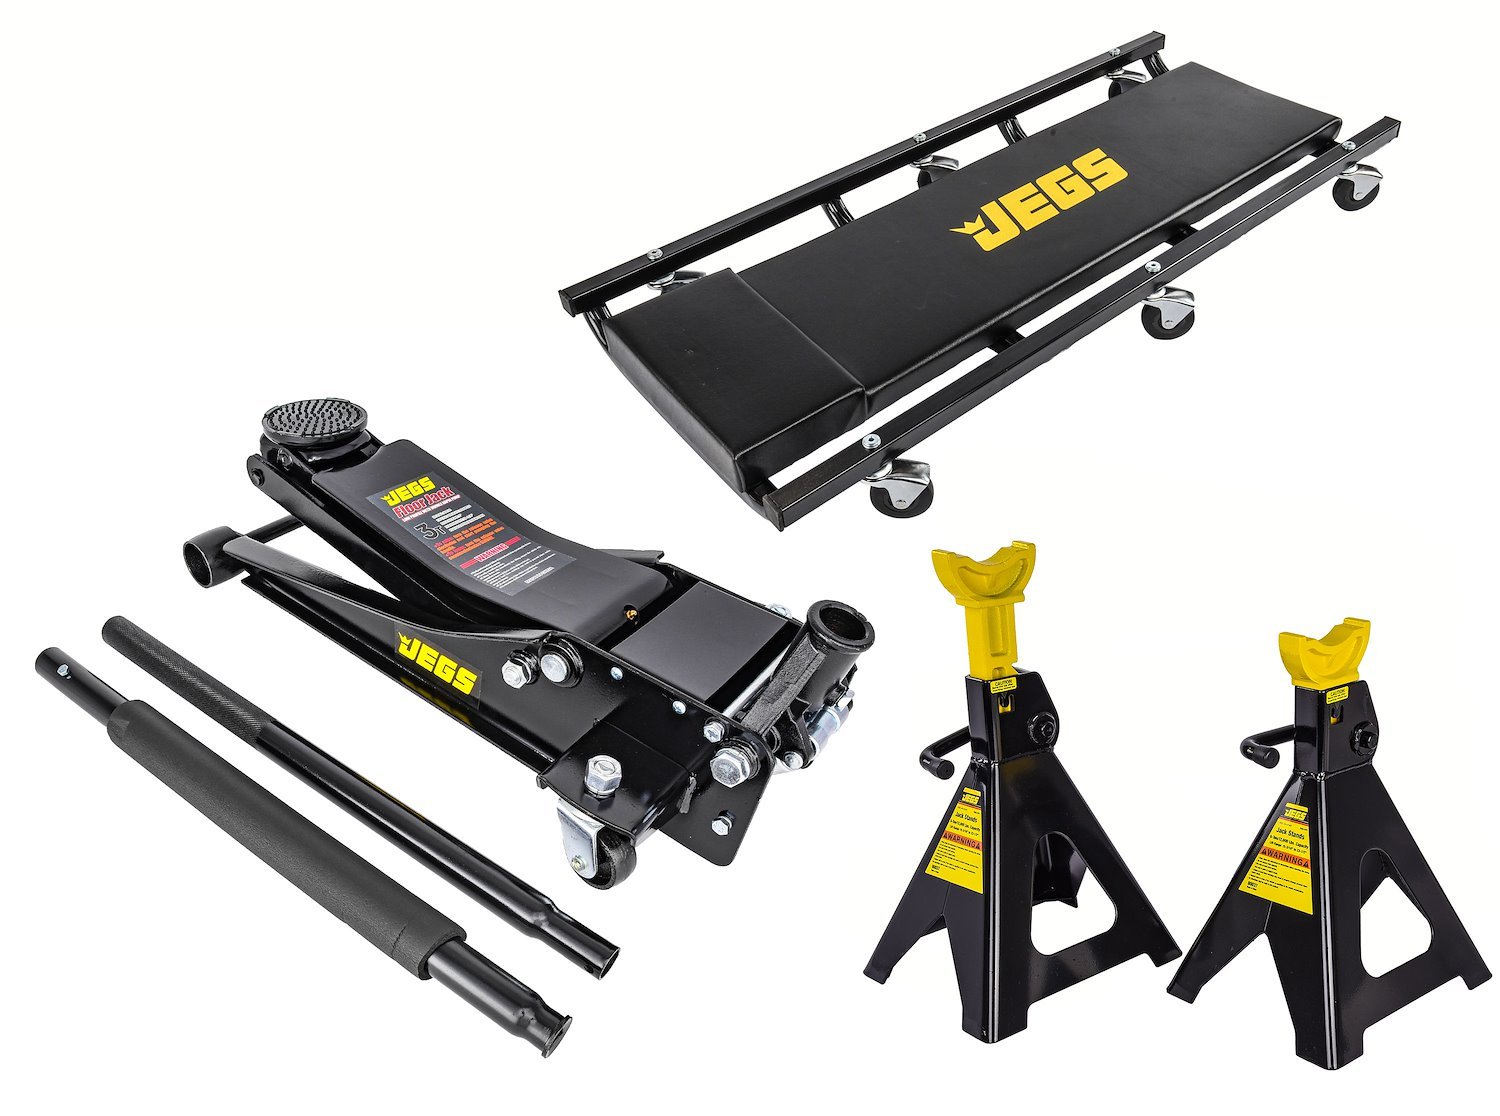 3-Ton Low-Profile Professional Floor Jack Kit with 6-Ton Capacity Jack Stands and Lo Boy Creeper